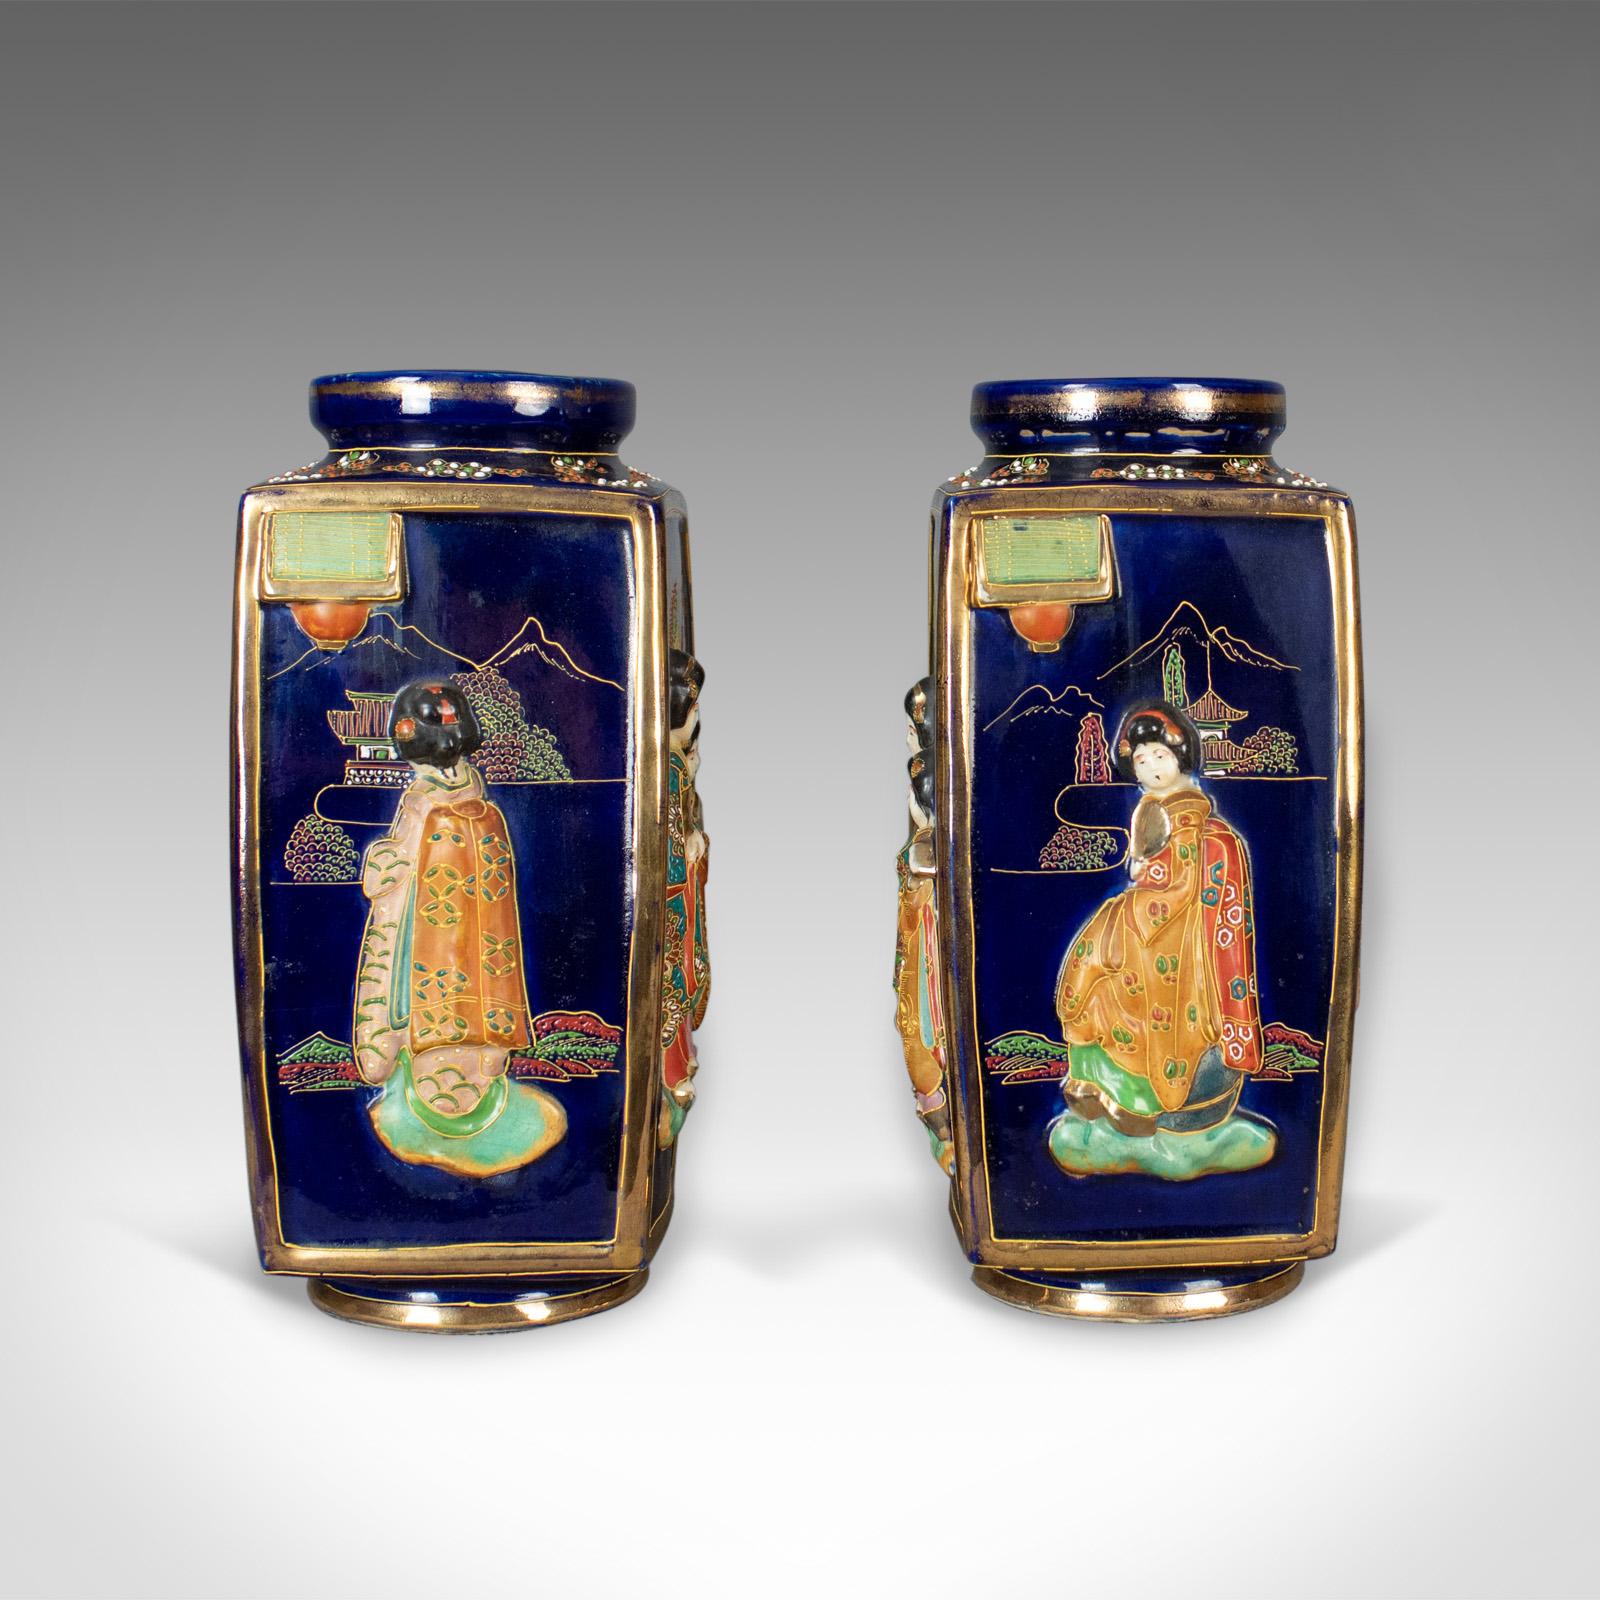 This is an antique pair of Japanese vases, ceramic pots dating to the 20th century.

Profusely decorated pair of ceramic vases
Free-from any damage or marks
Scenes of ladies in kimonos, pagodas, trees and mountains
Deep blue ground with gold